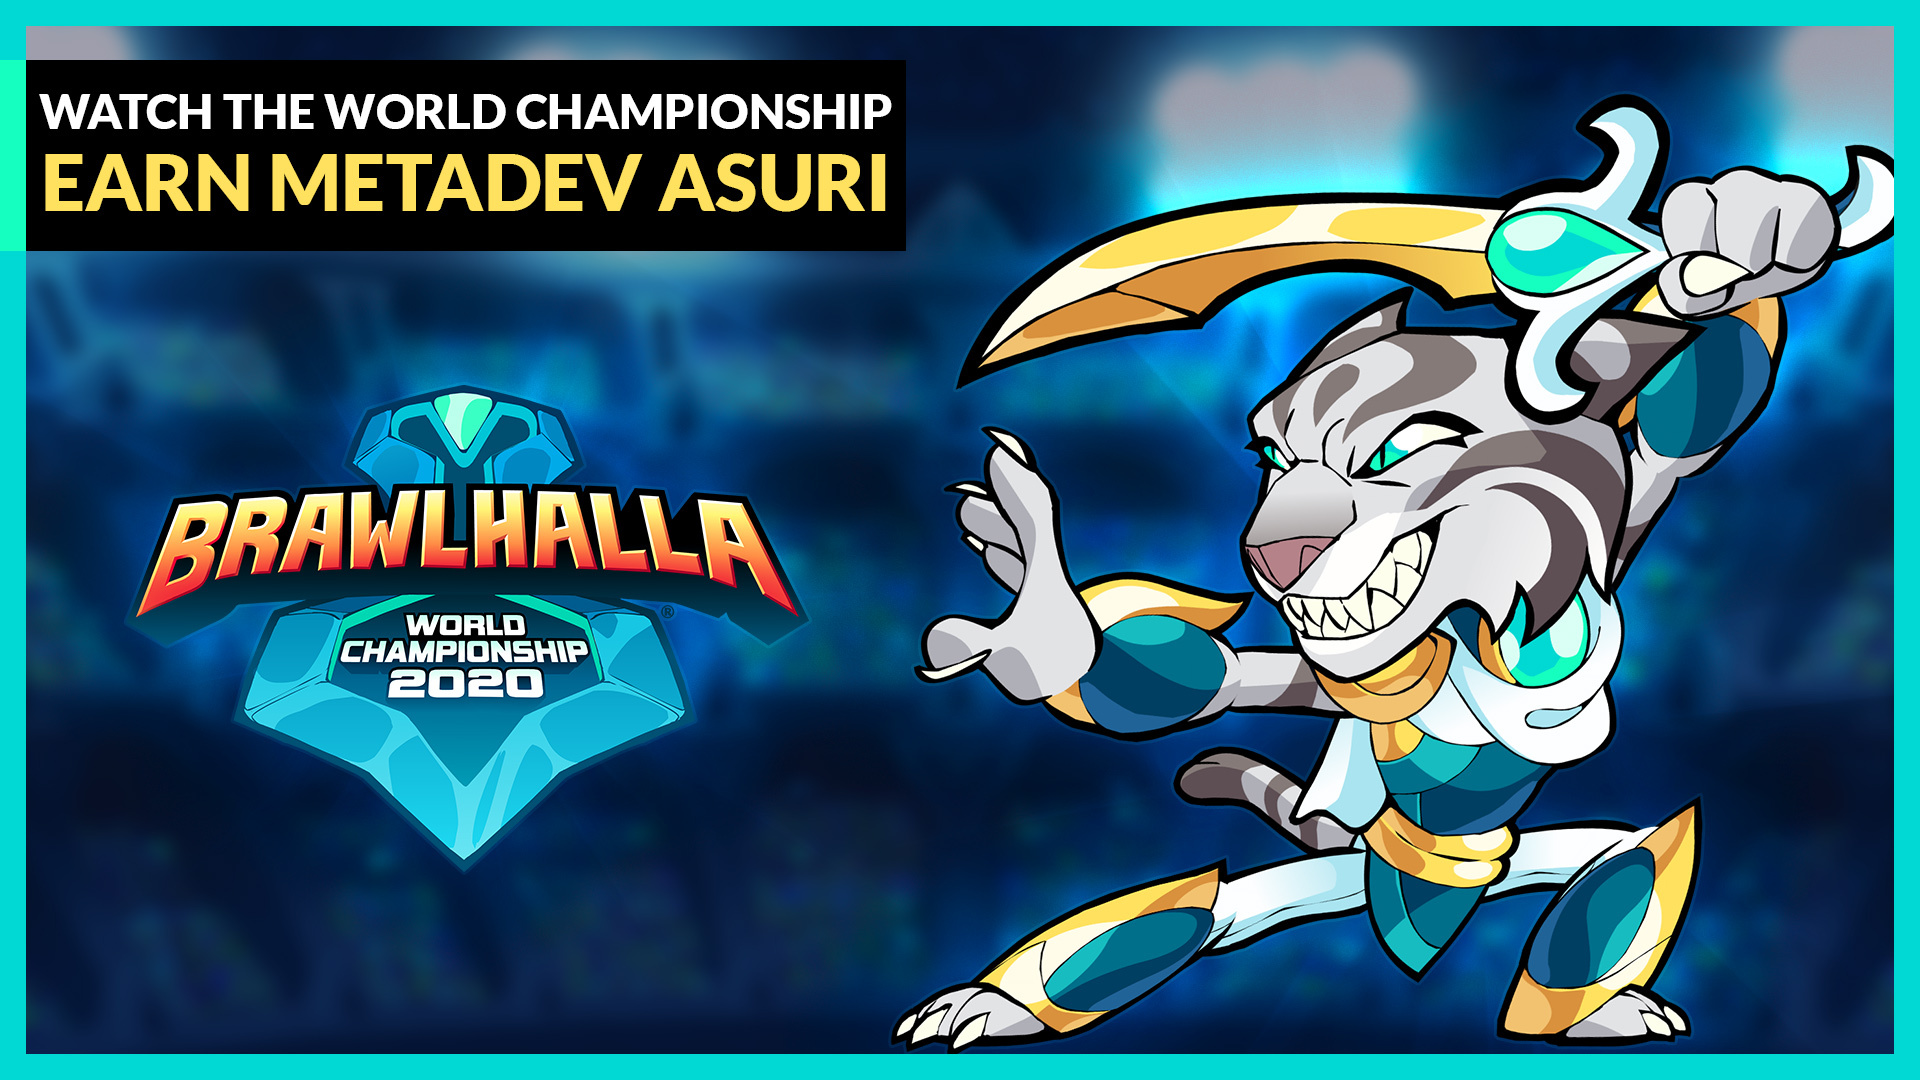 BCX approaches! Earn METADEV Asuri by watching on Twitch this weekend